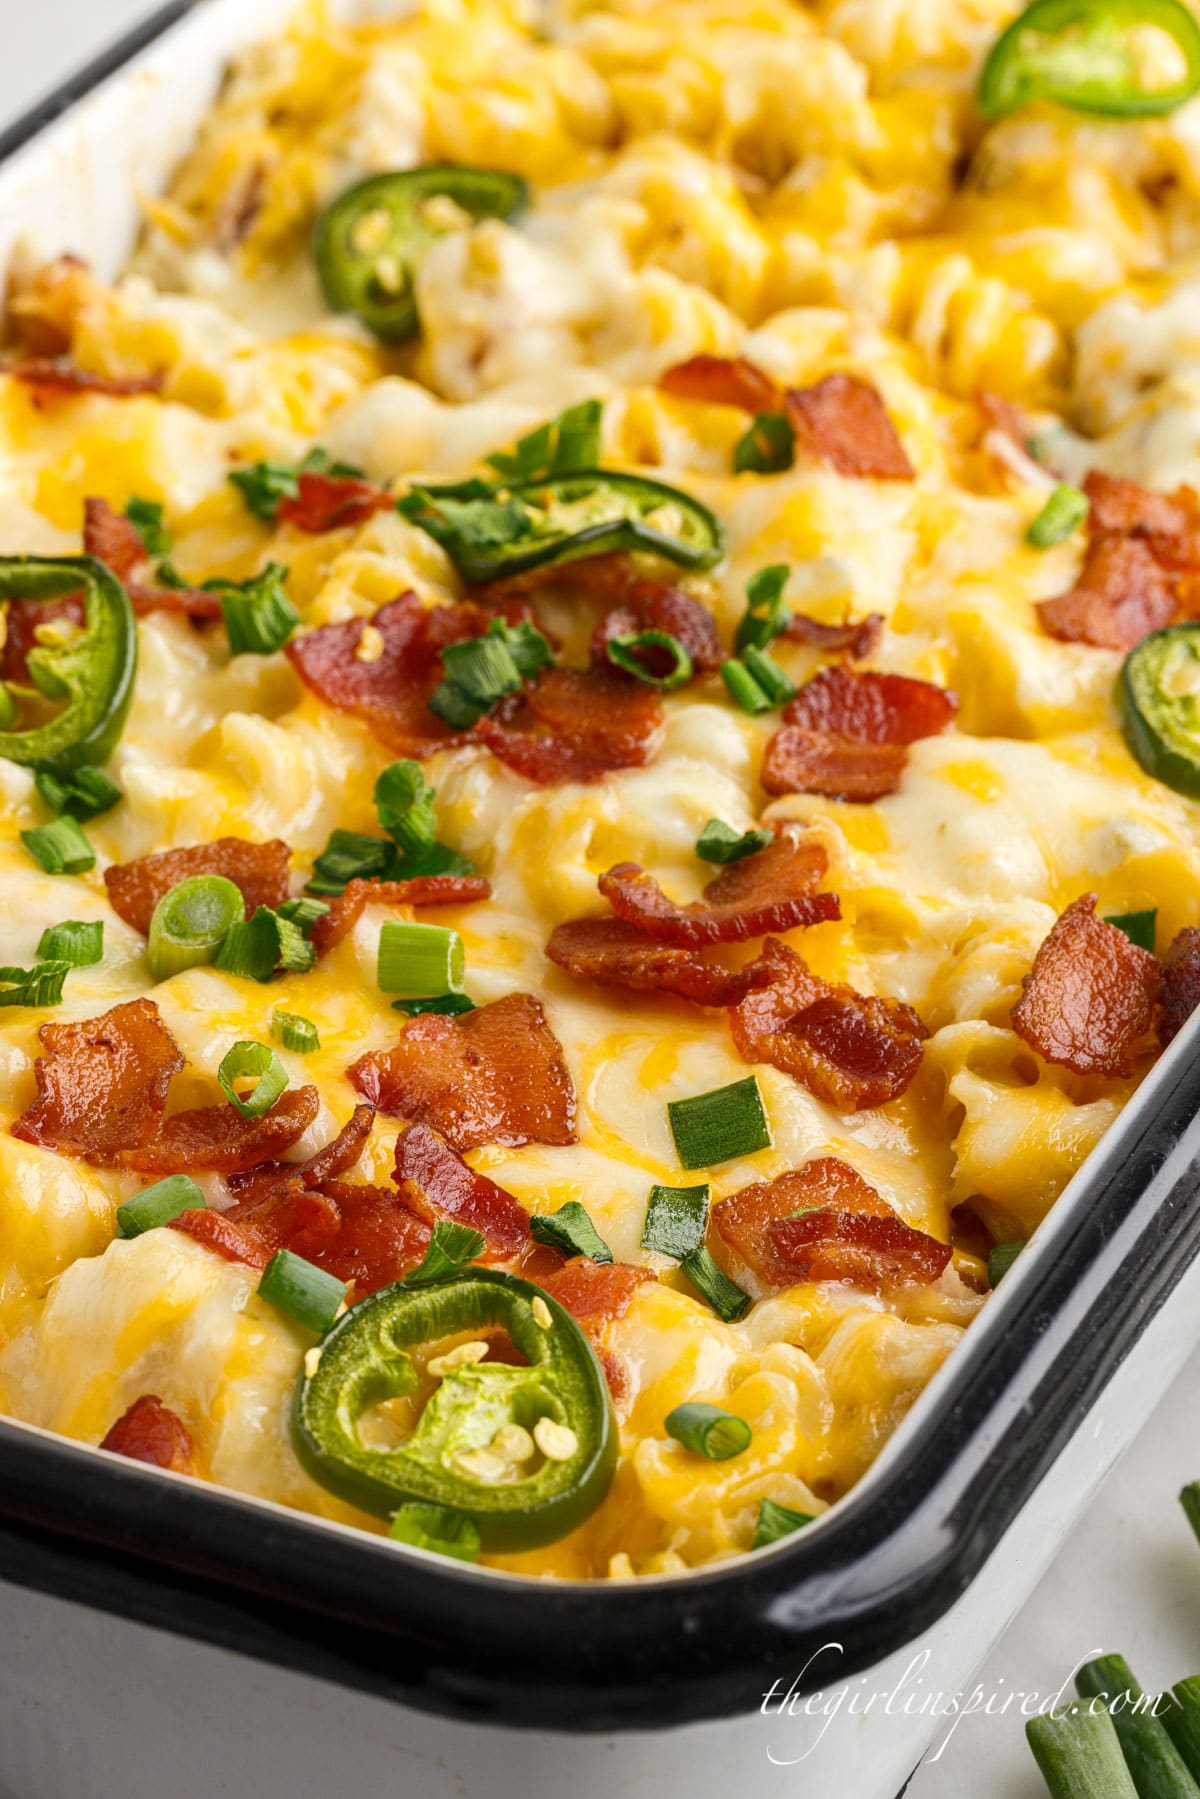 Jalapeno Popper Chicken Casserole in a glass baking dish after cooking